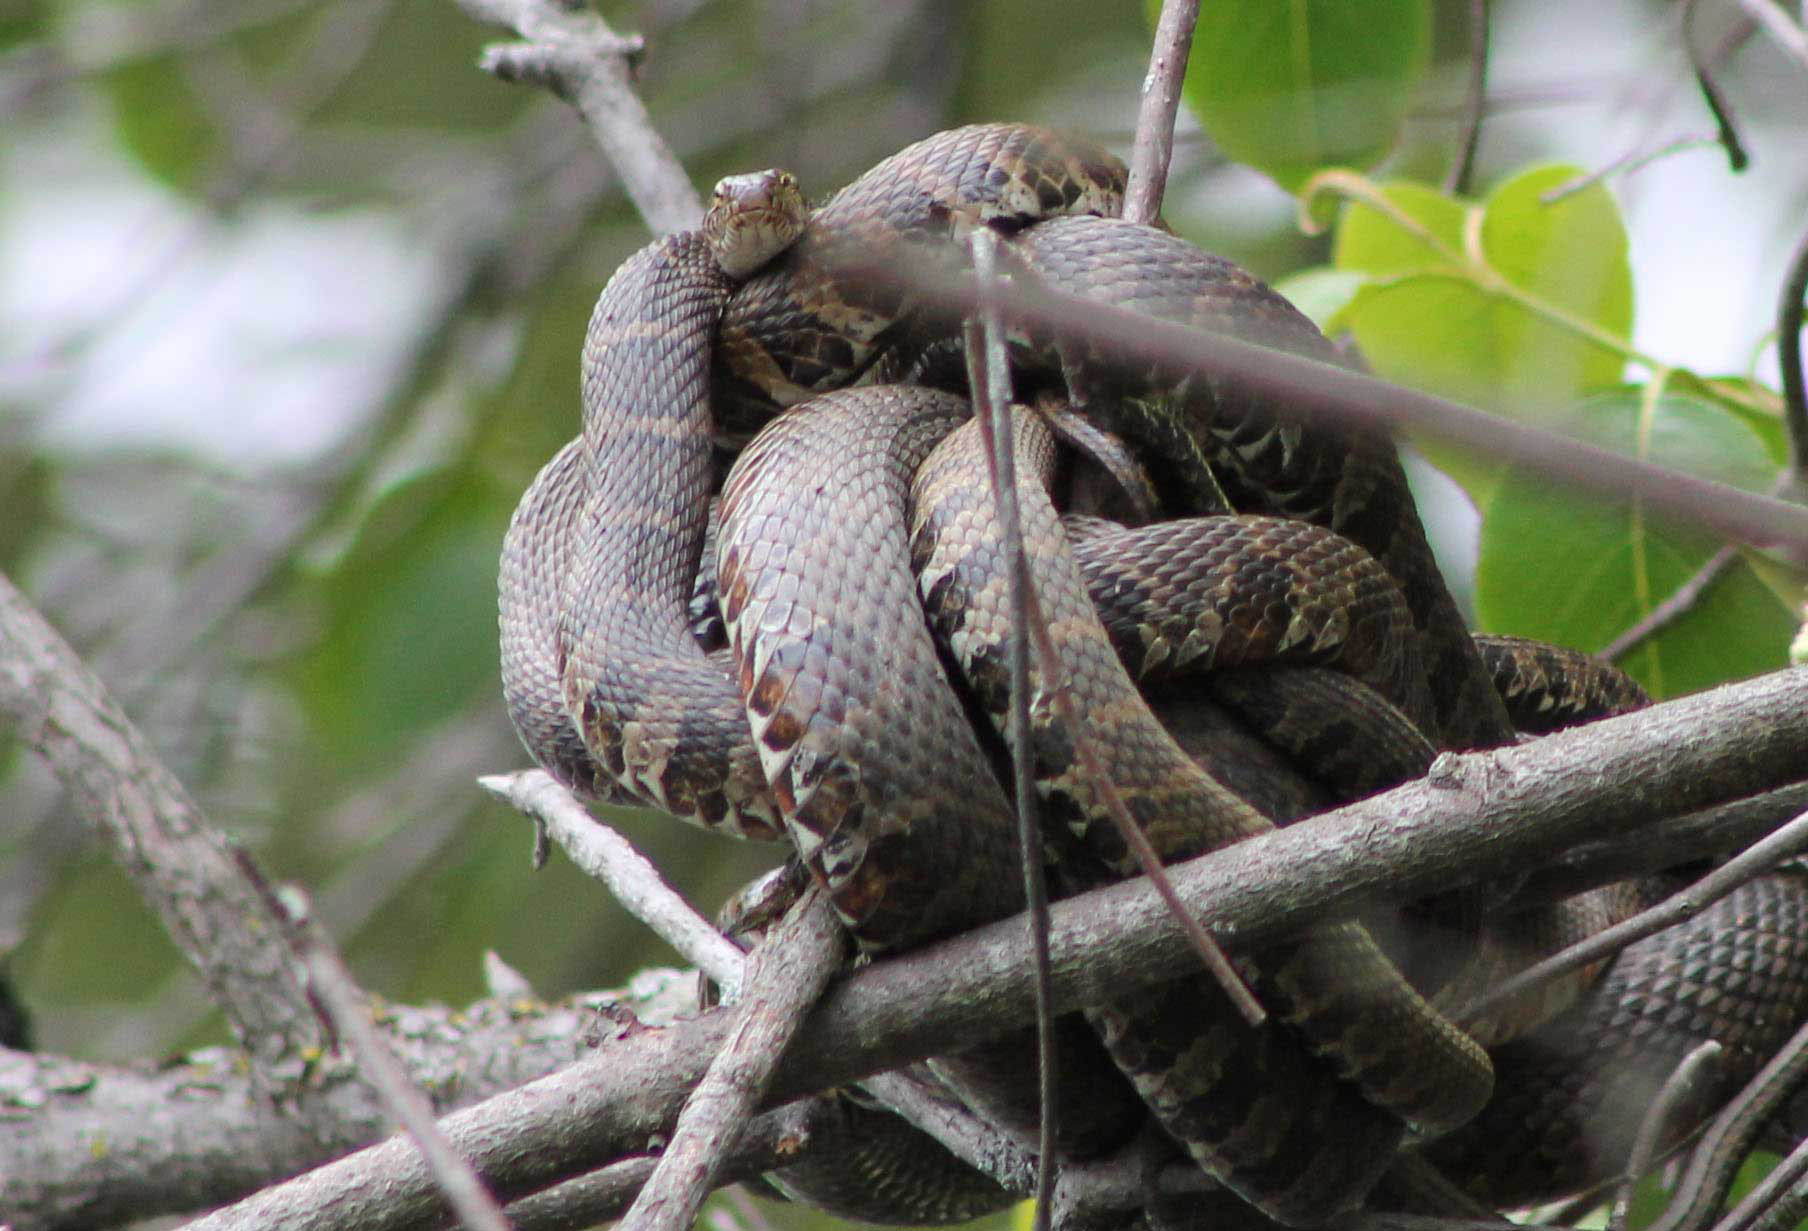 Northern water snakes in a mating ball.